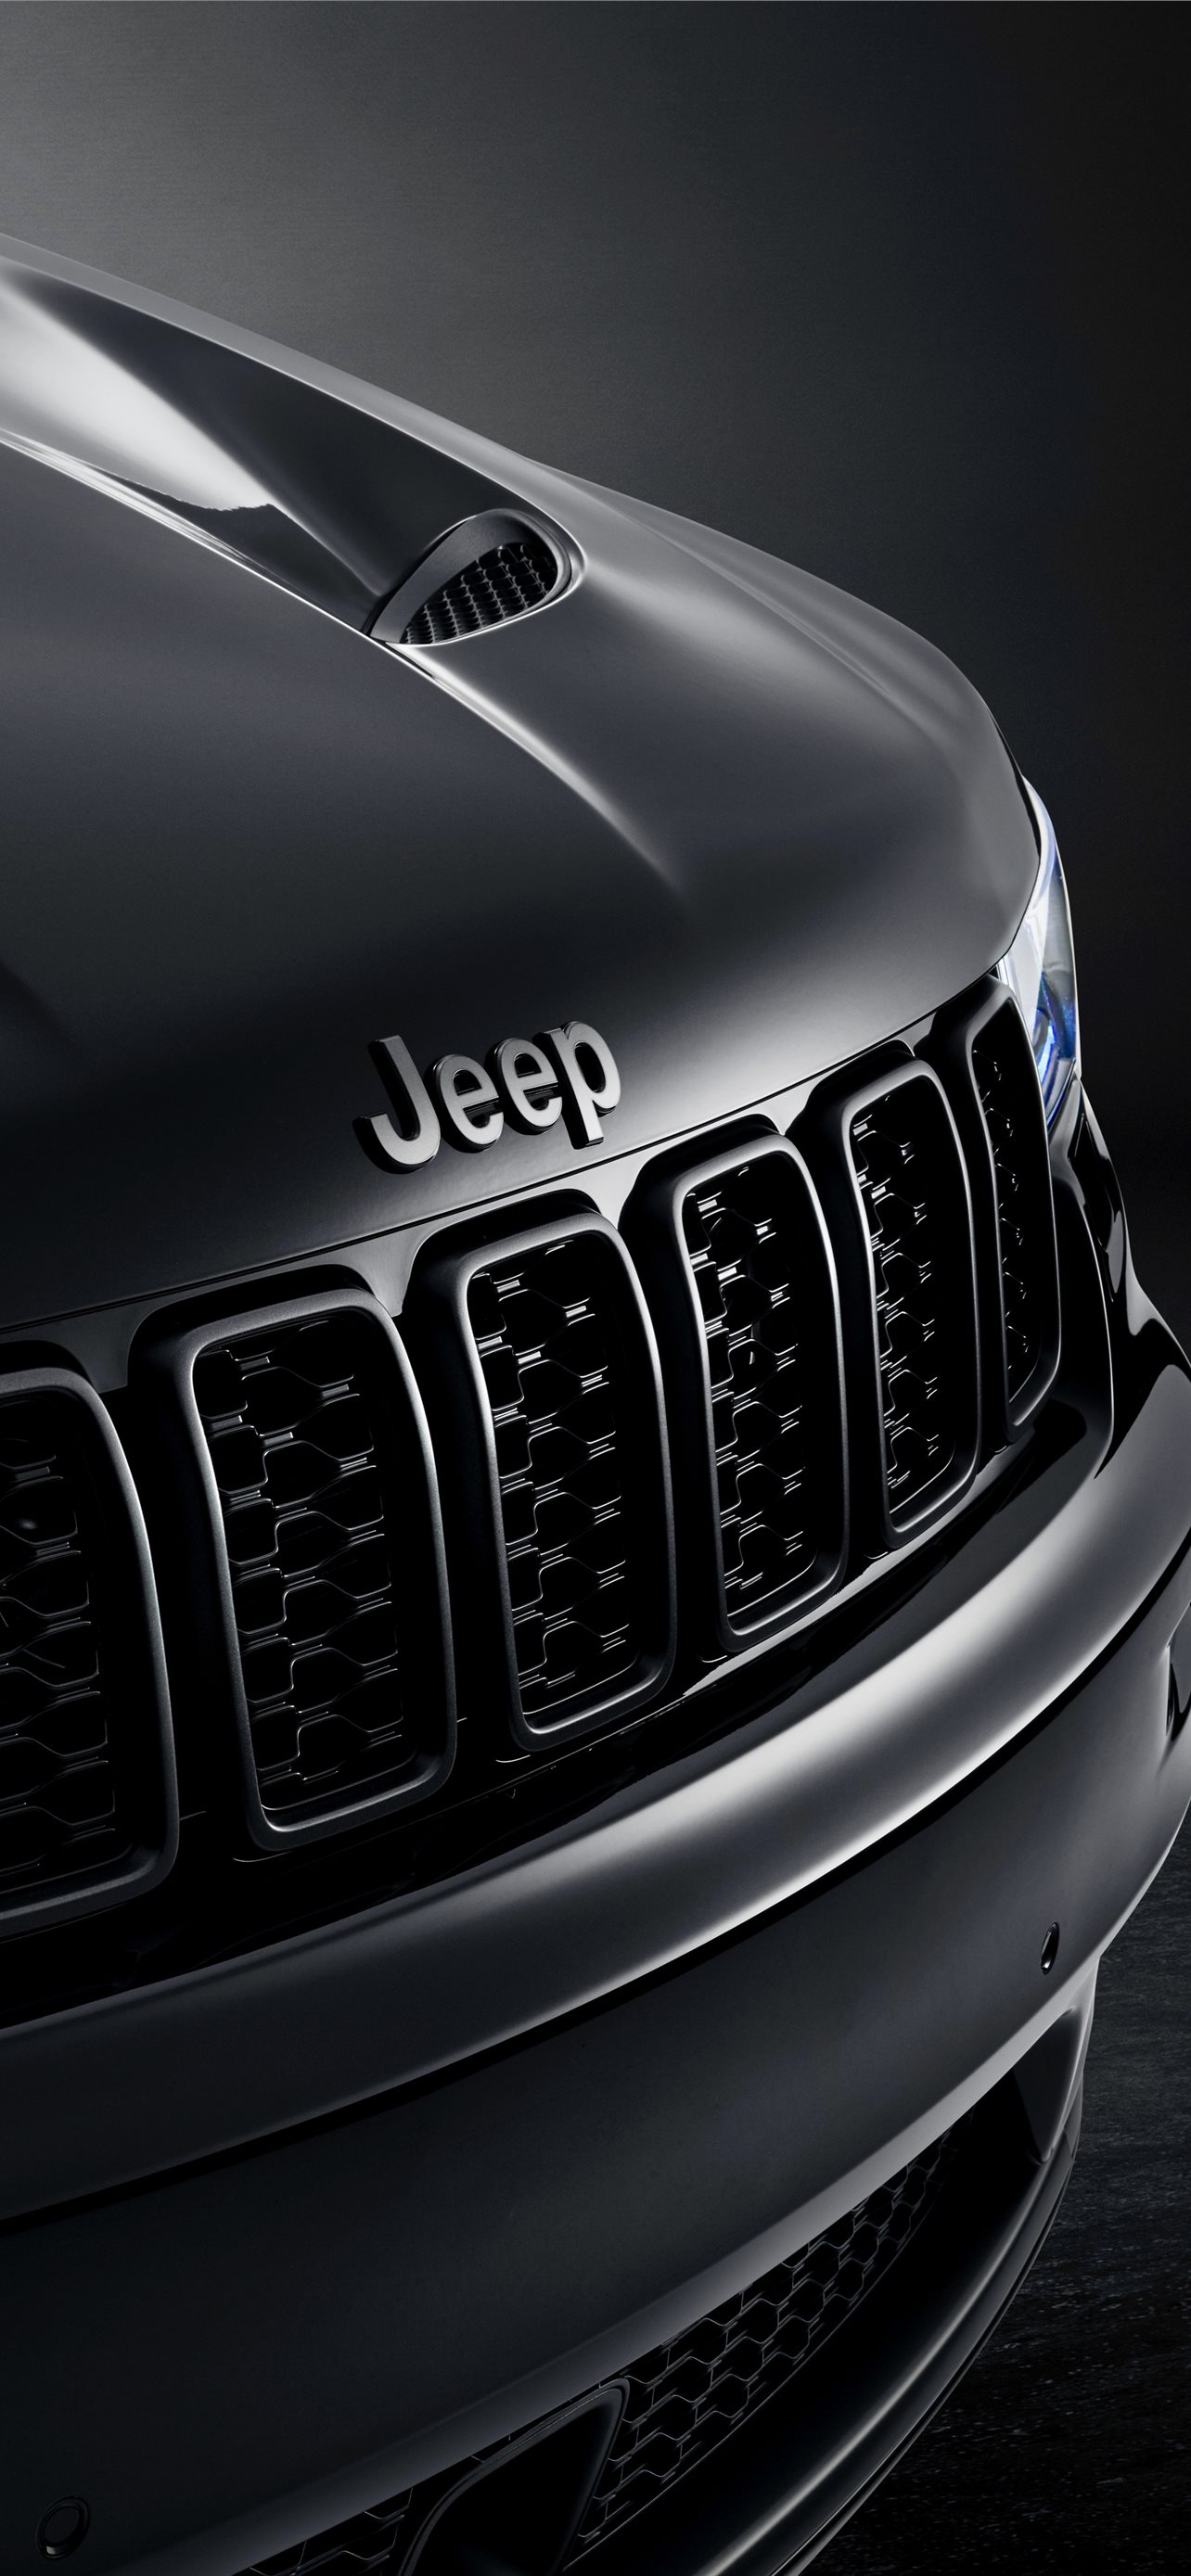 1080x1920 Jeep Wallpapers for Android Mobile Smartphone [Full HD]